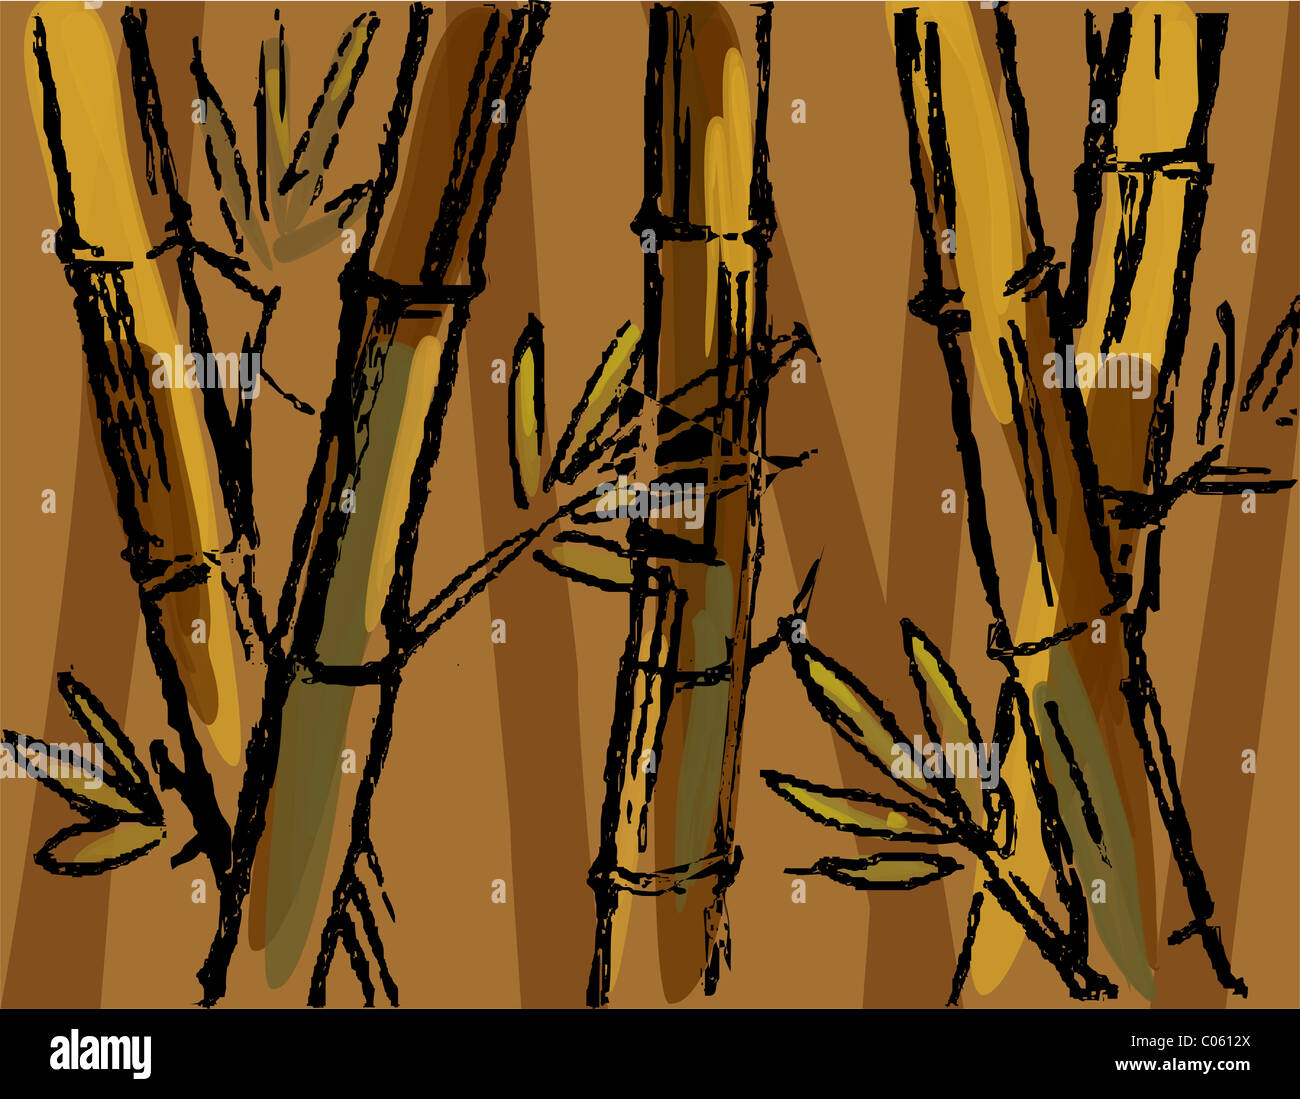 Digital painting of bamboo in colour background. The artist is experiencing the beauty of bamboo trees. Stock Photo